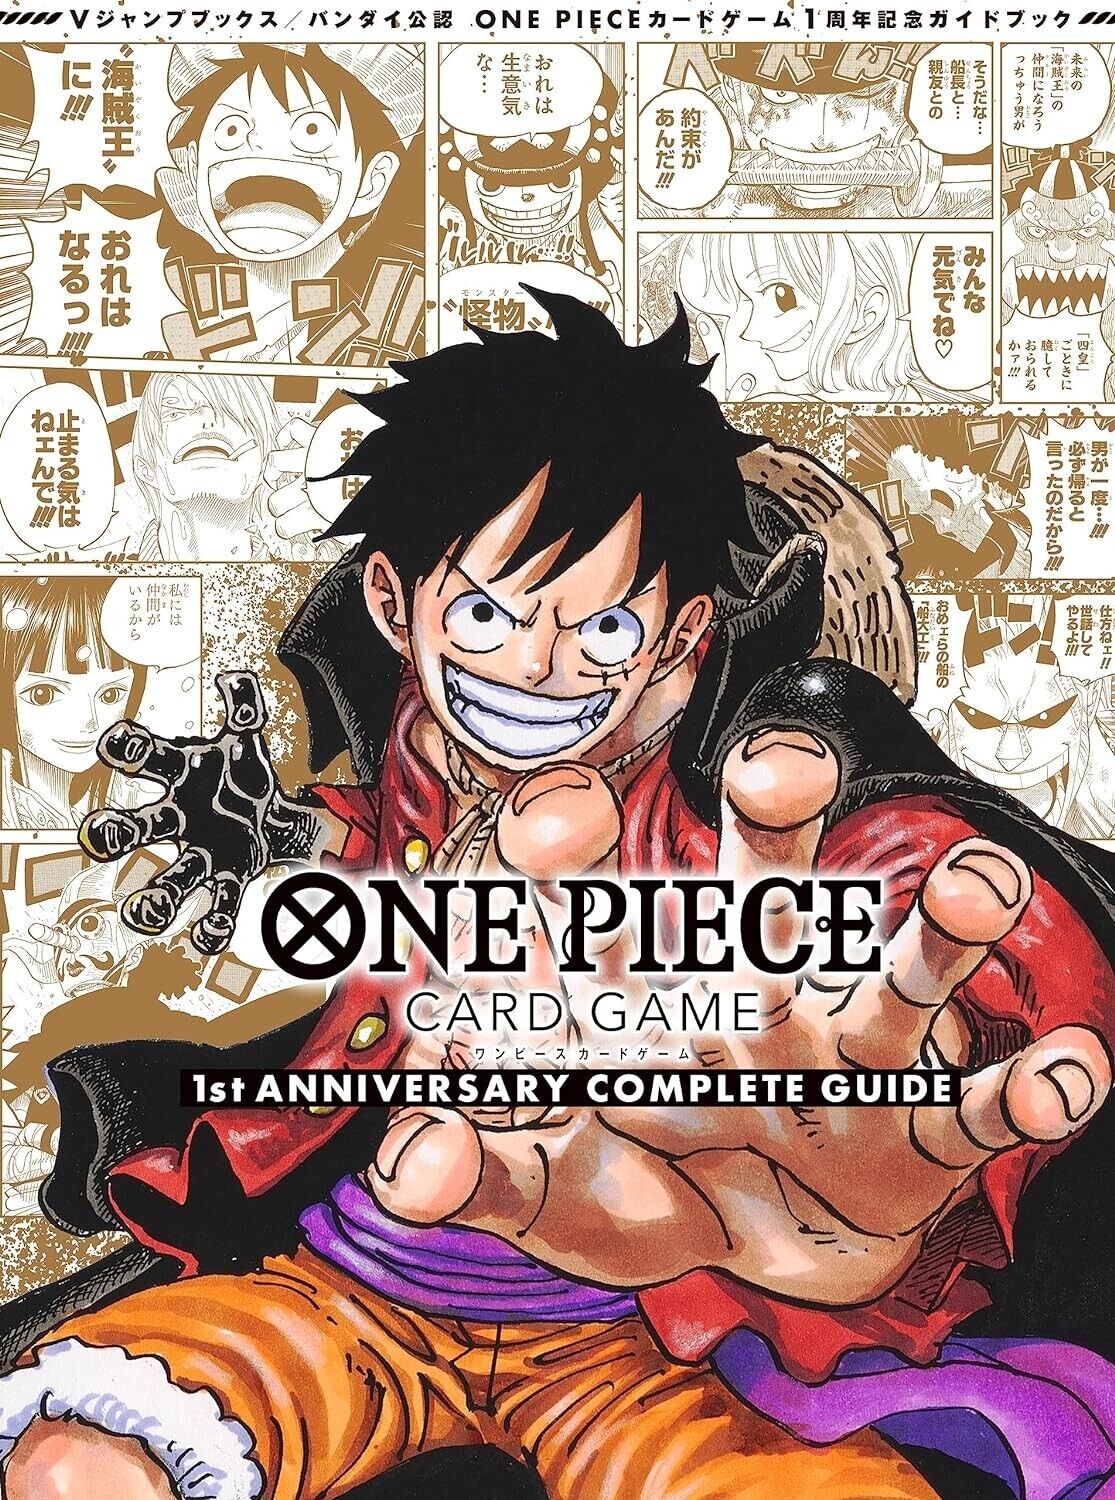 ONE PIECE Card Game 1st ANNIVERSARY COMPLETE GUIDE 2 Promo Cards Set US SELLER